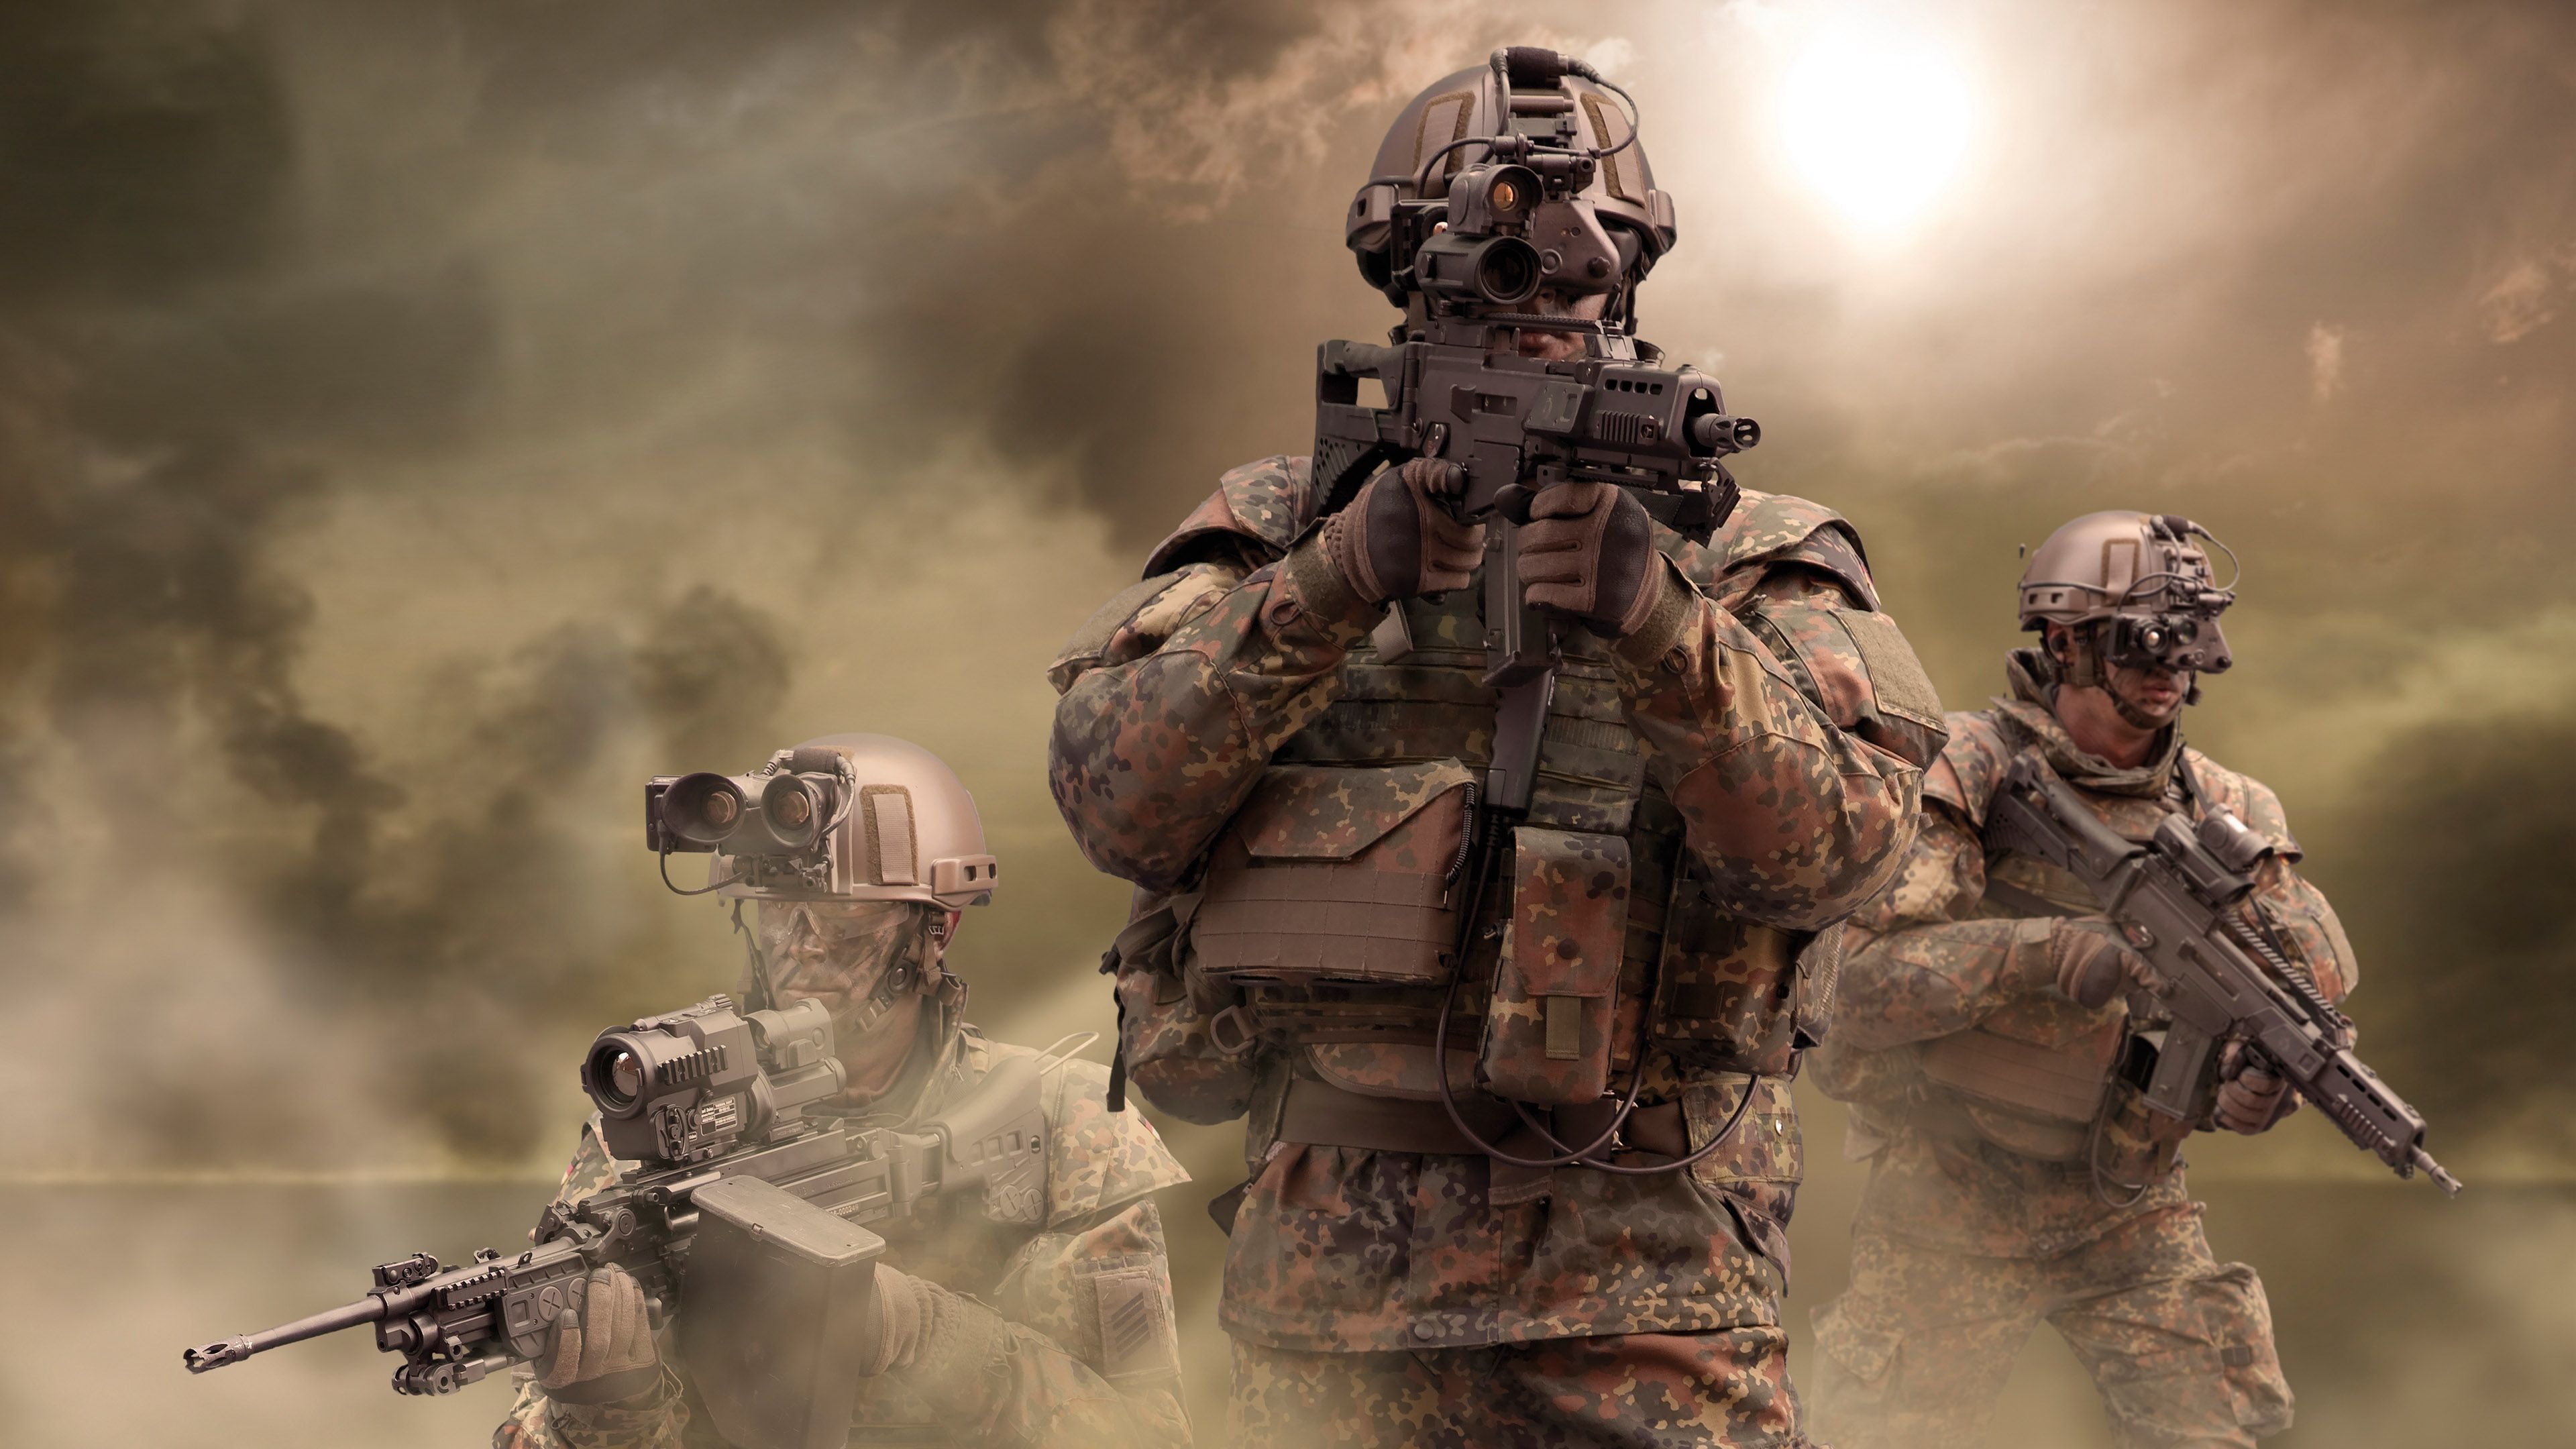 HD Military Wallpaper (best HD Military Wallpaper and image) on WallpaperChat